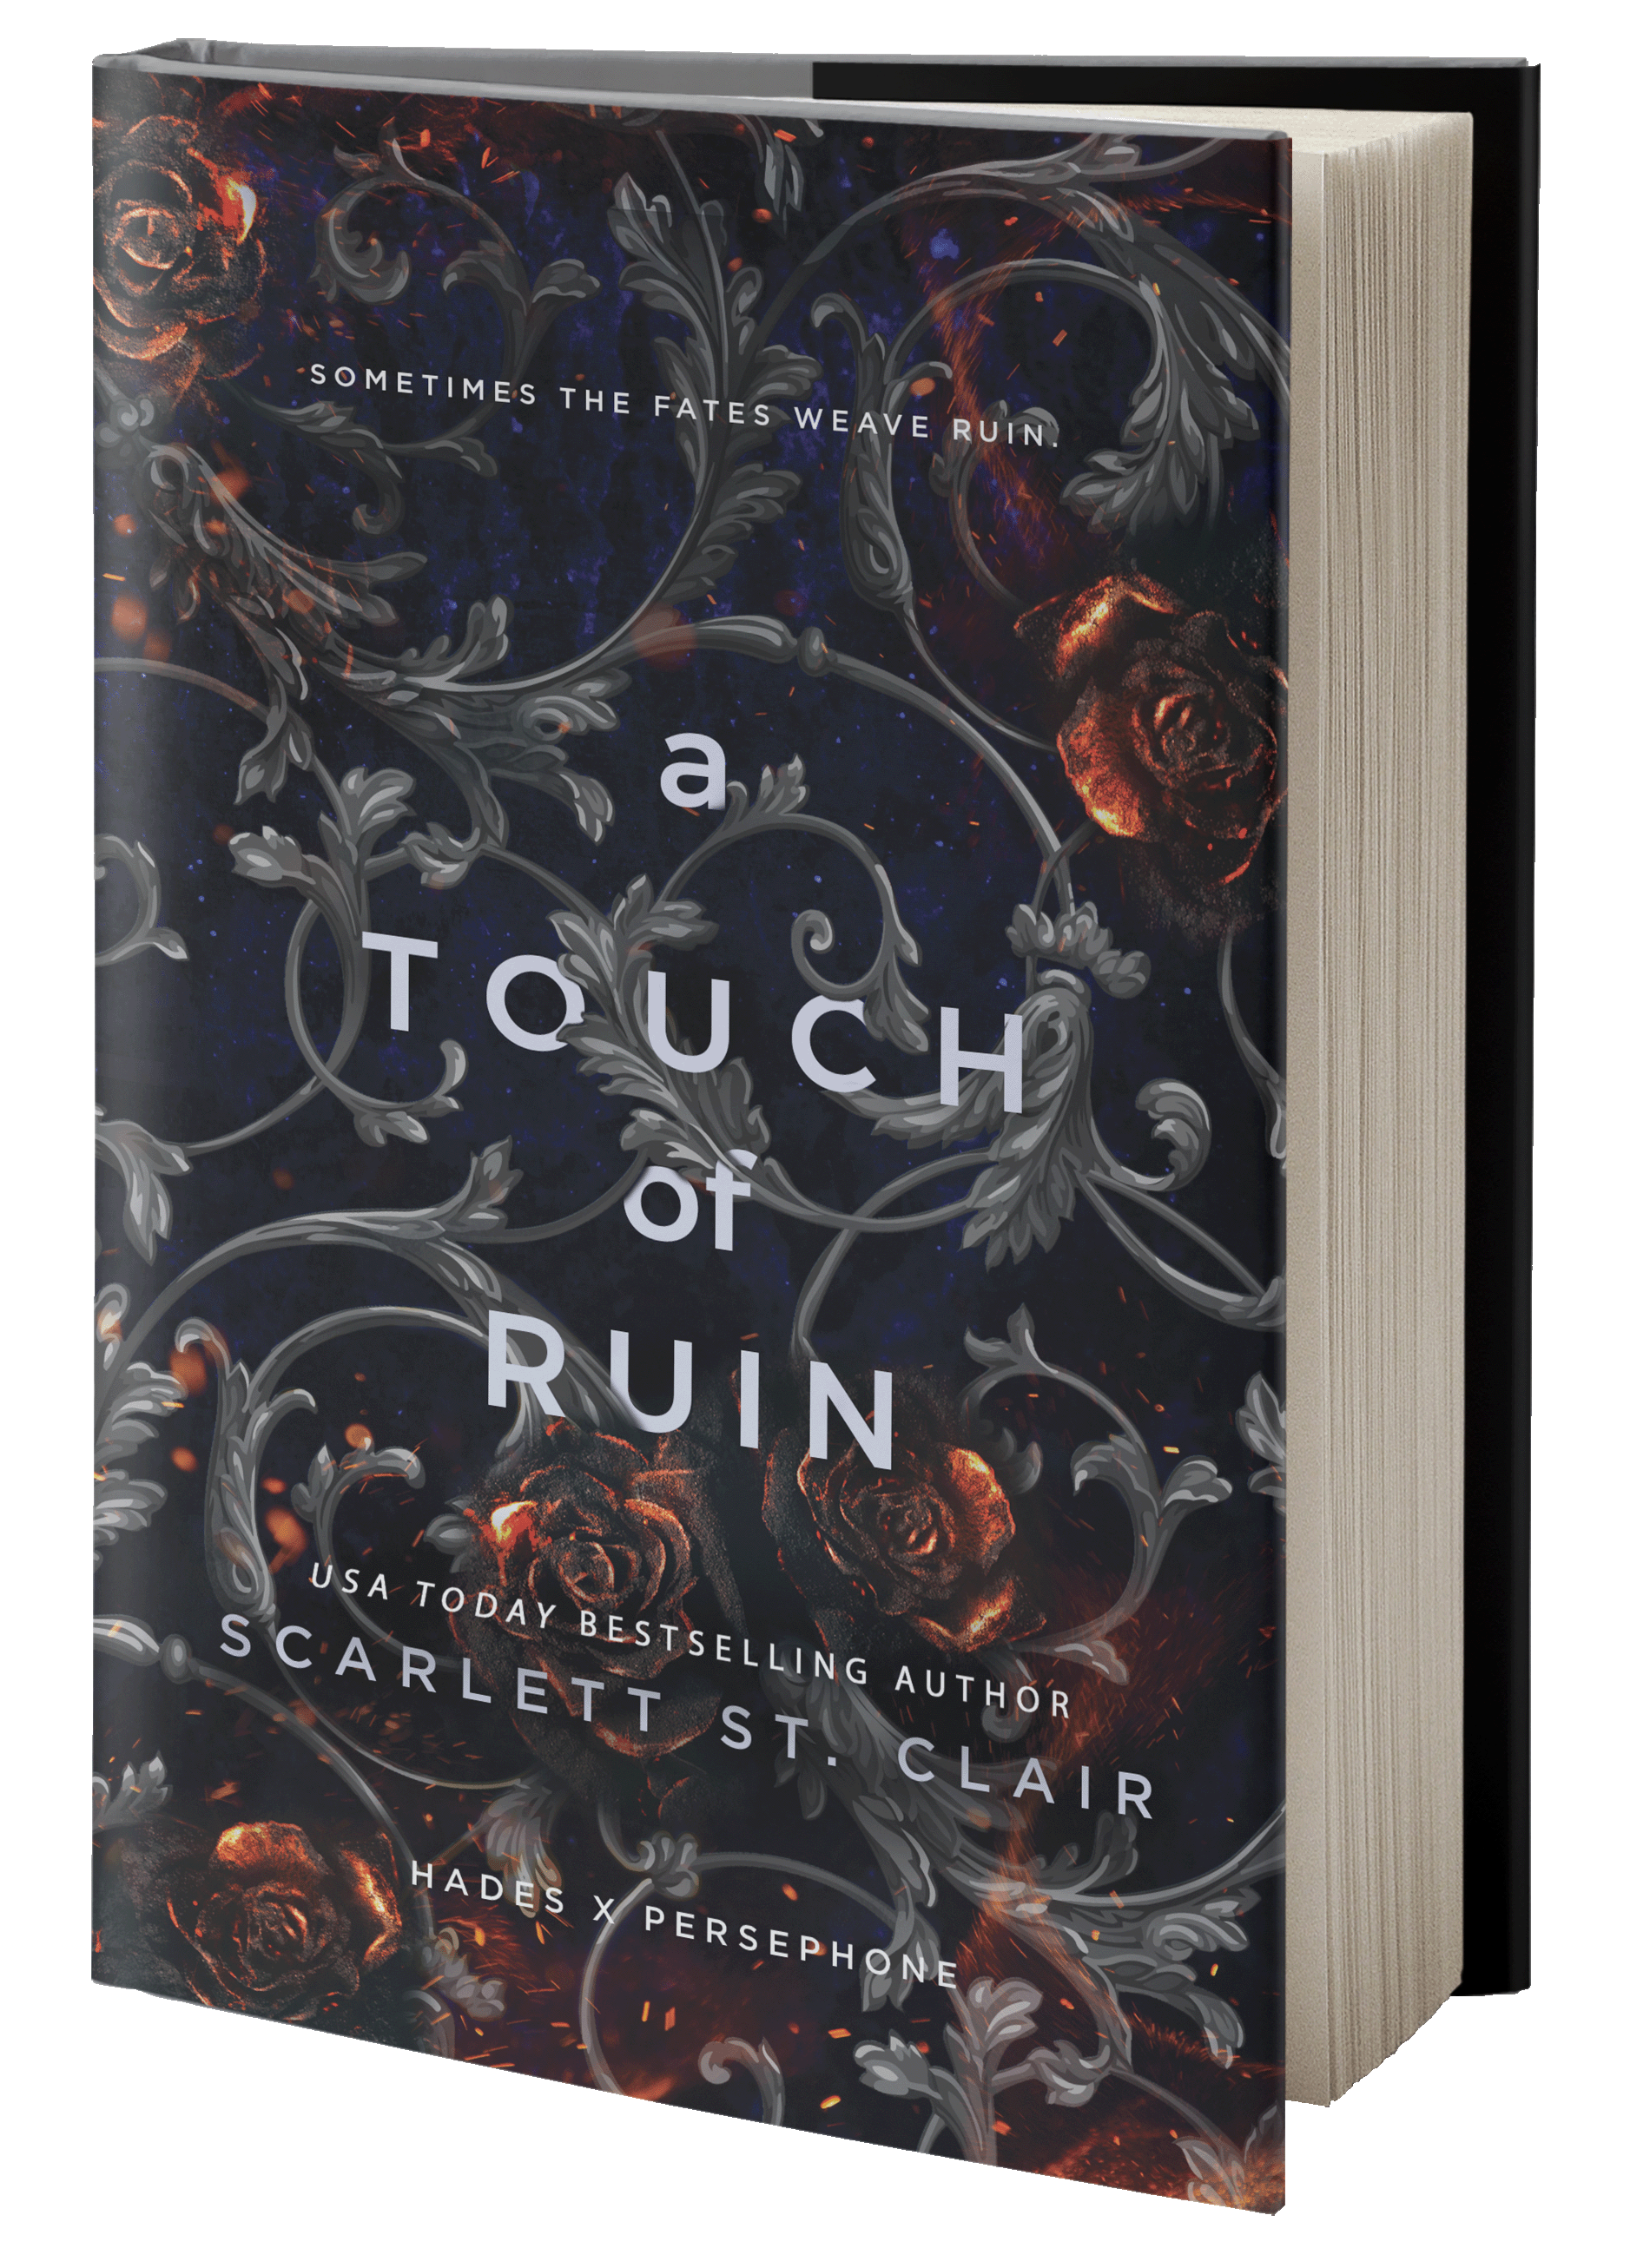 Book cover of "A Touch of Ruin"